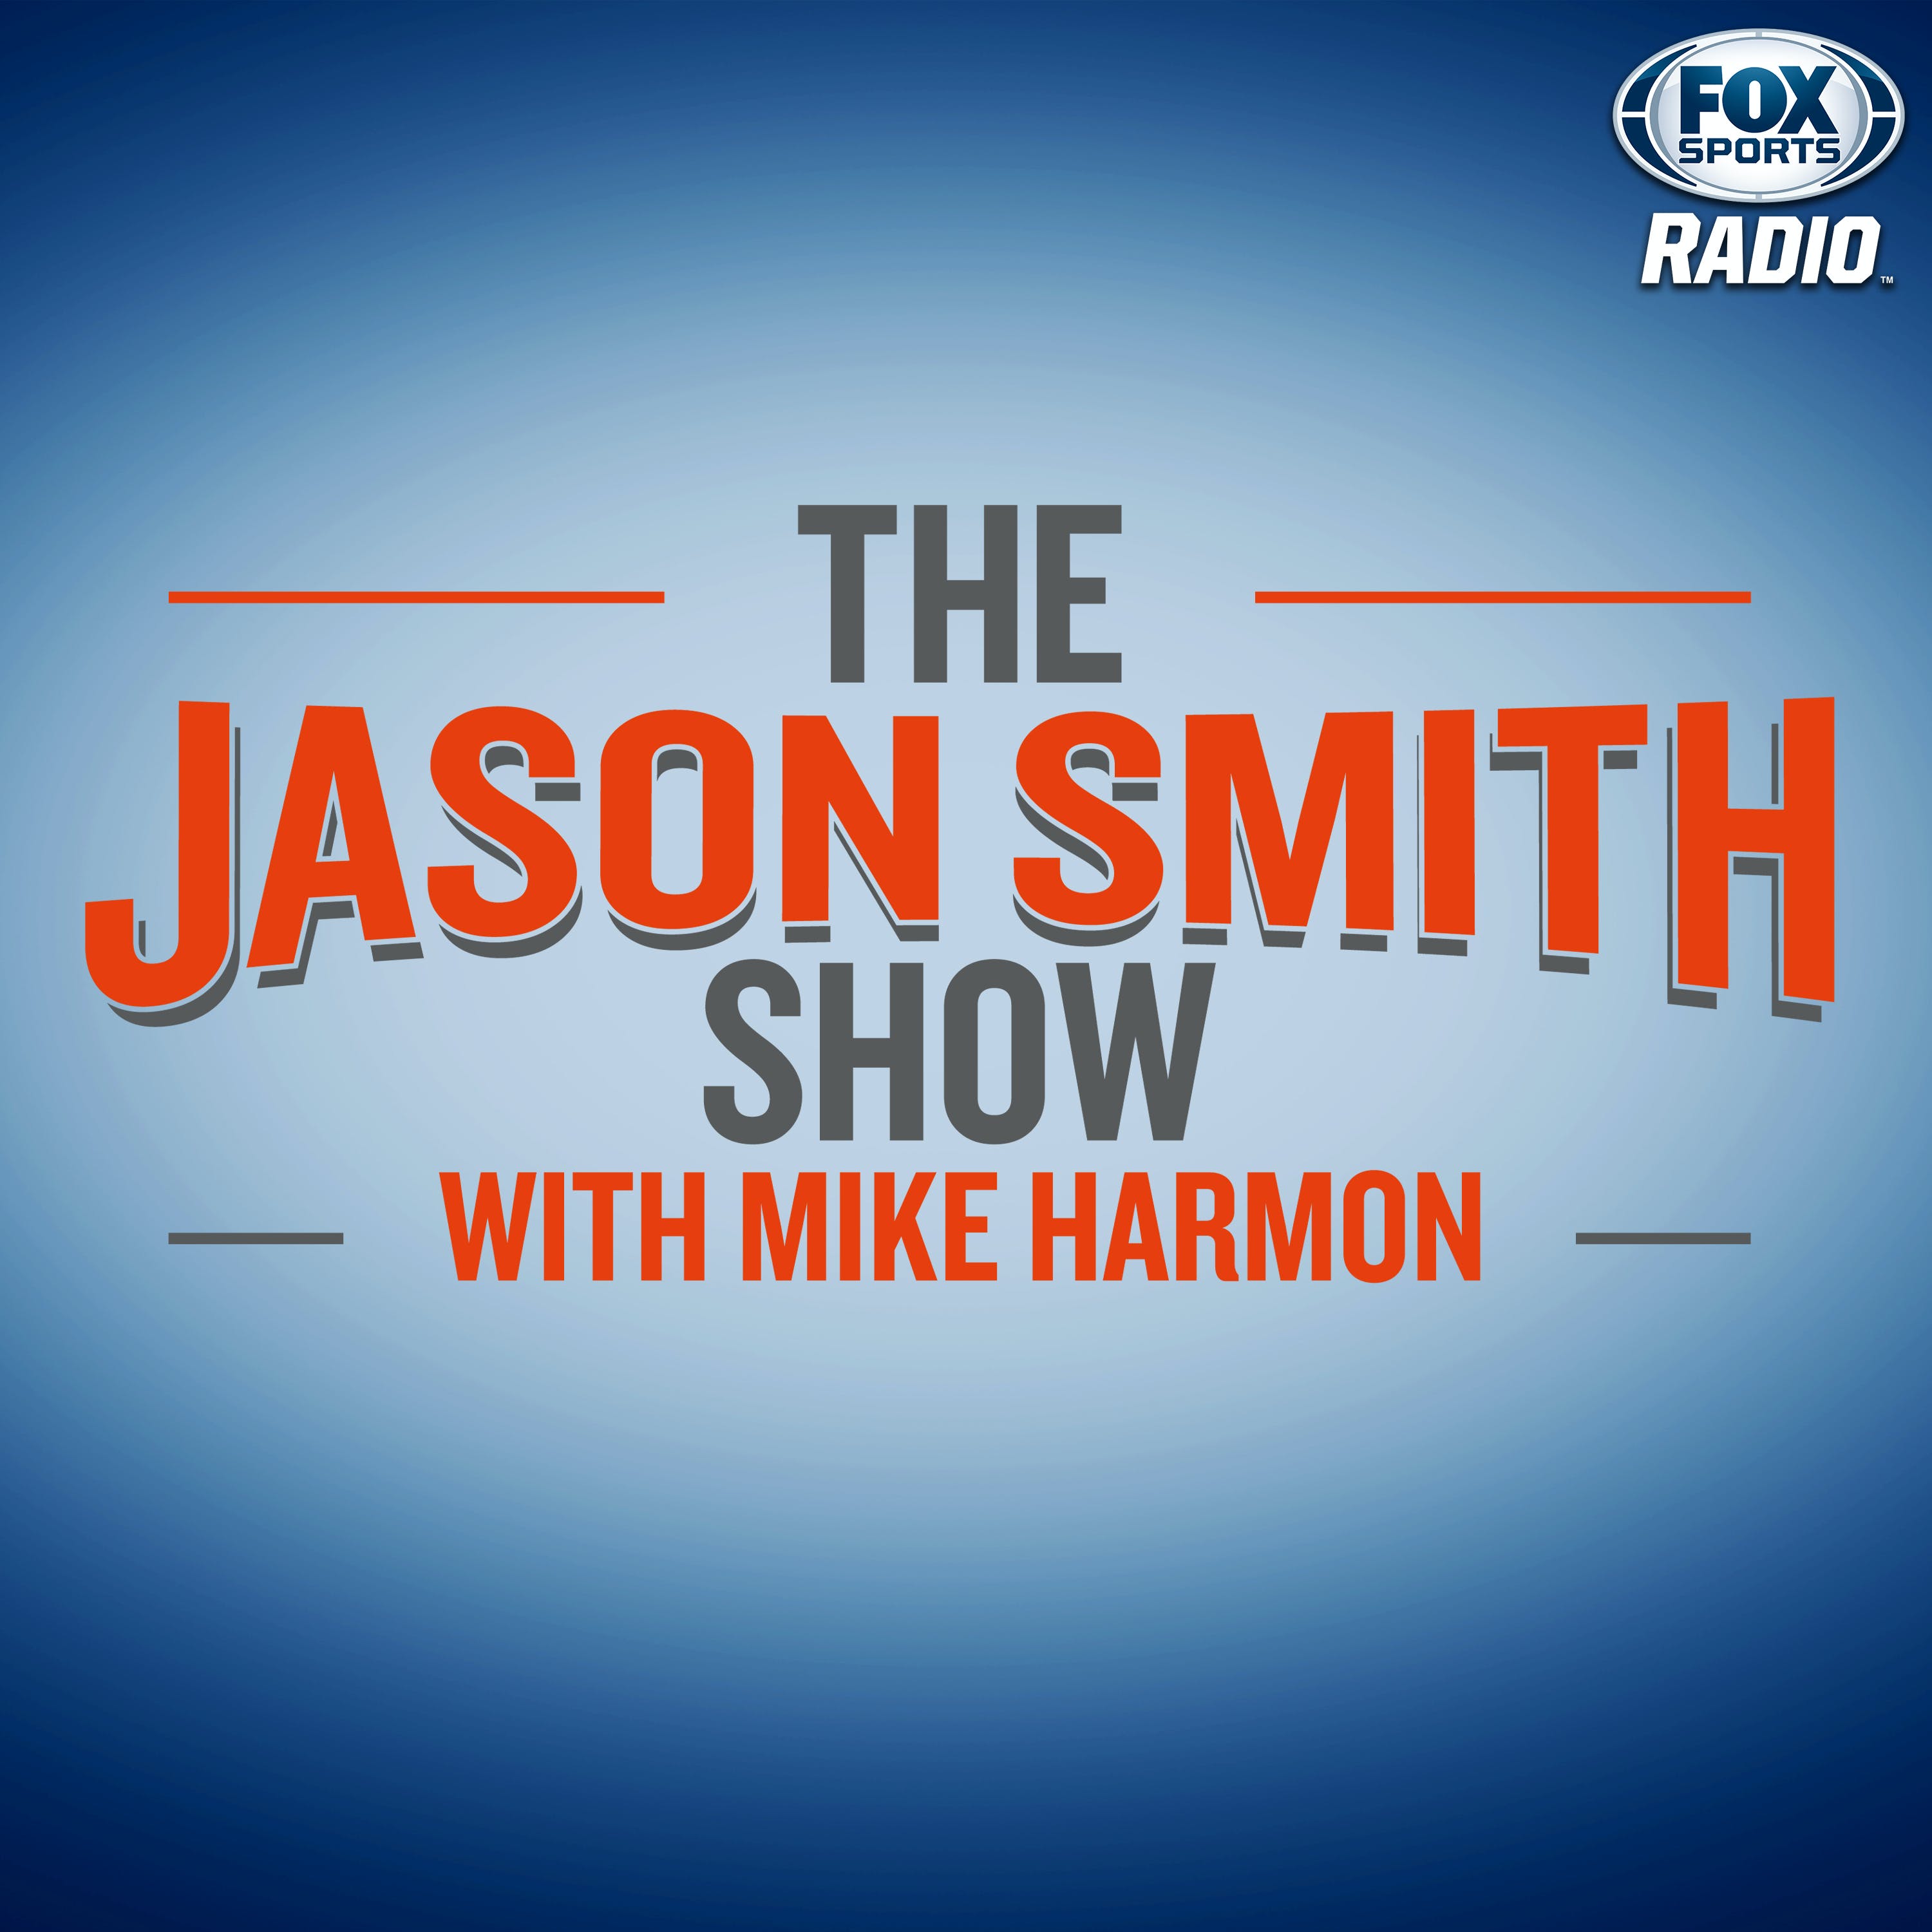 09/10/2021 - Best of the Jason Smith Show with Mike Harmon